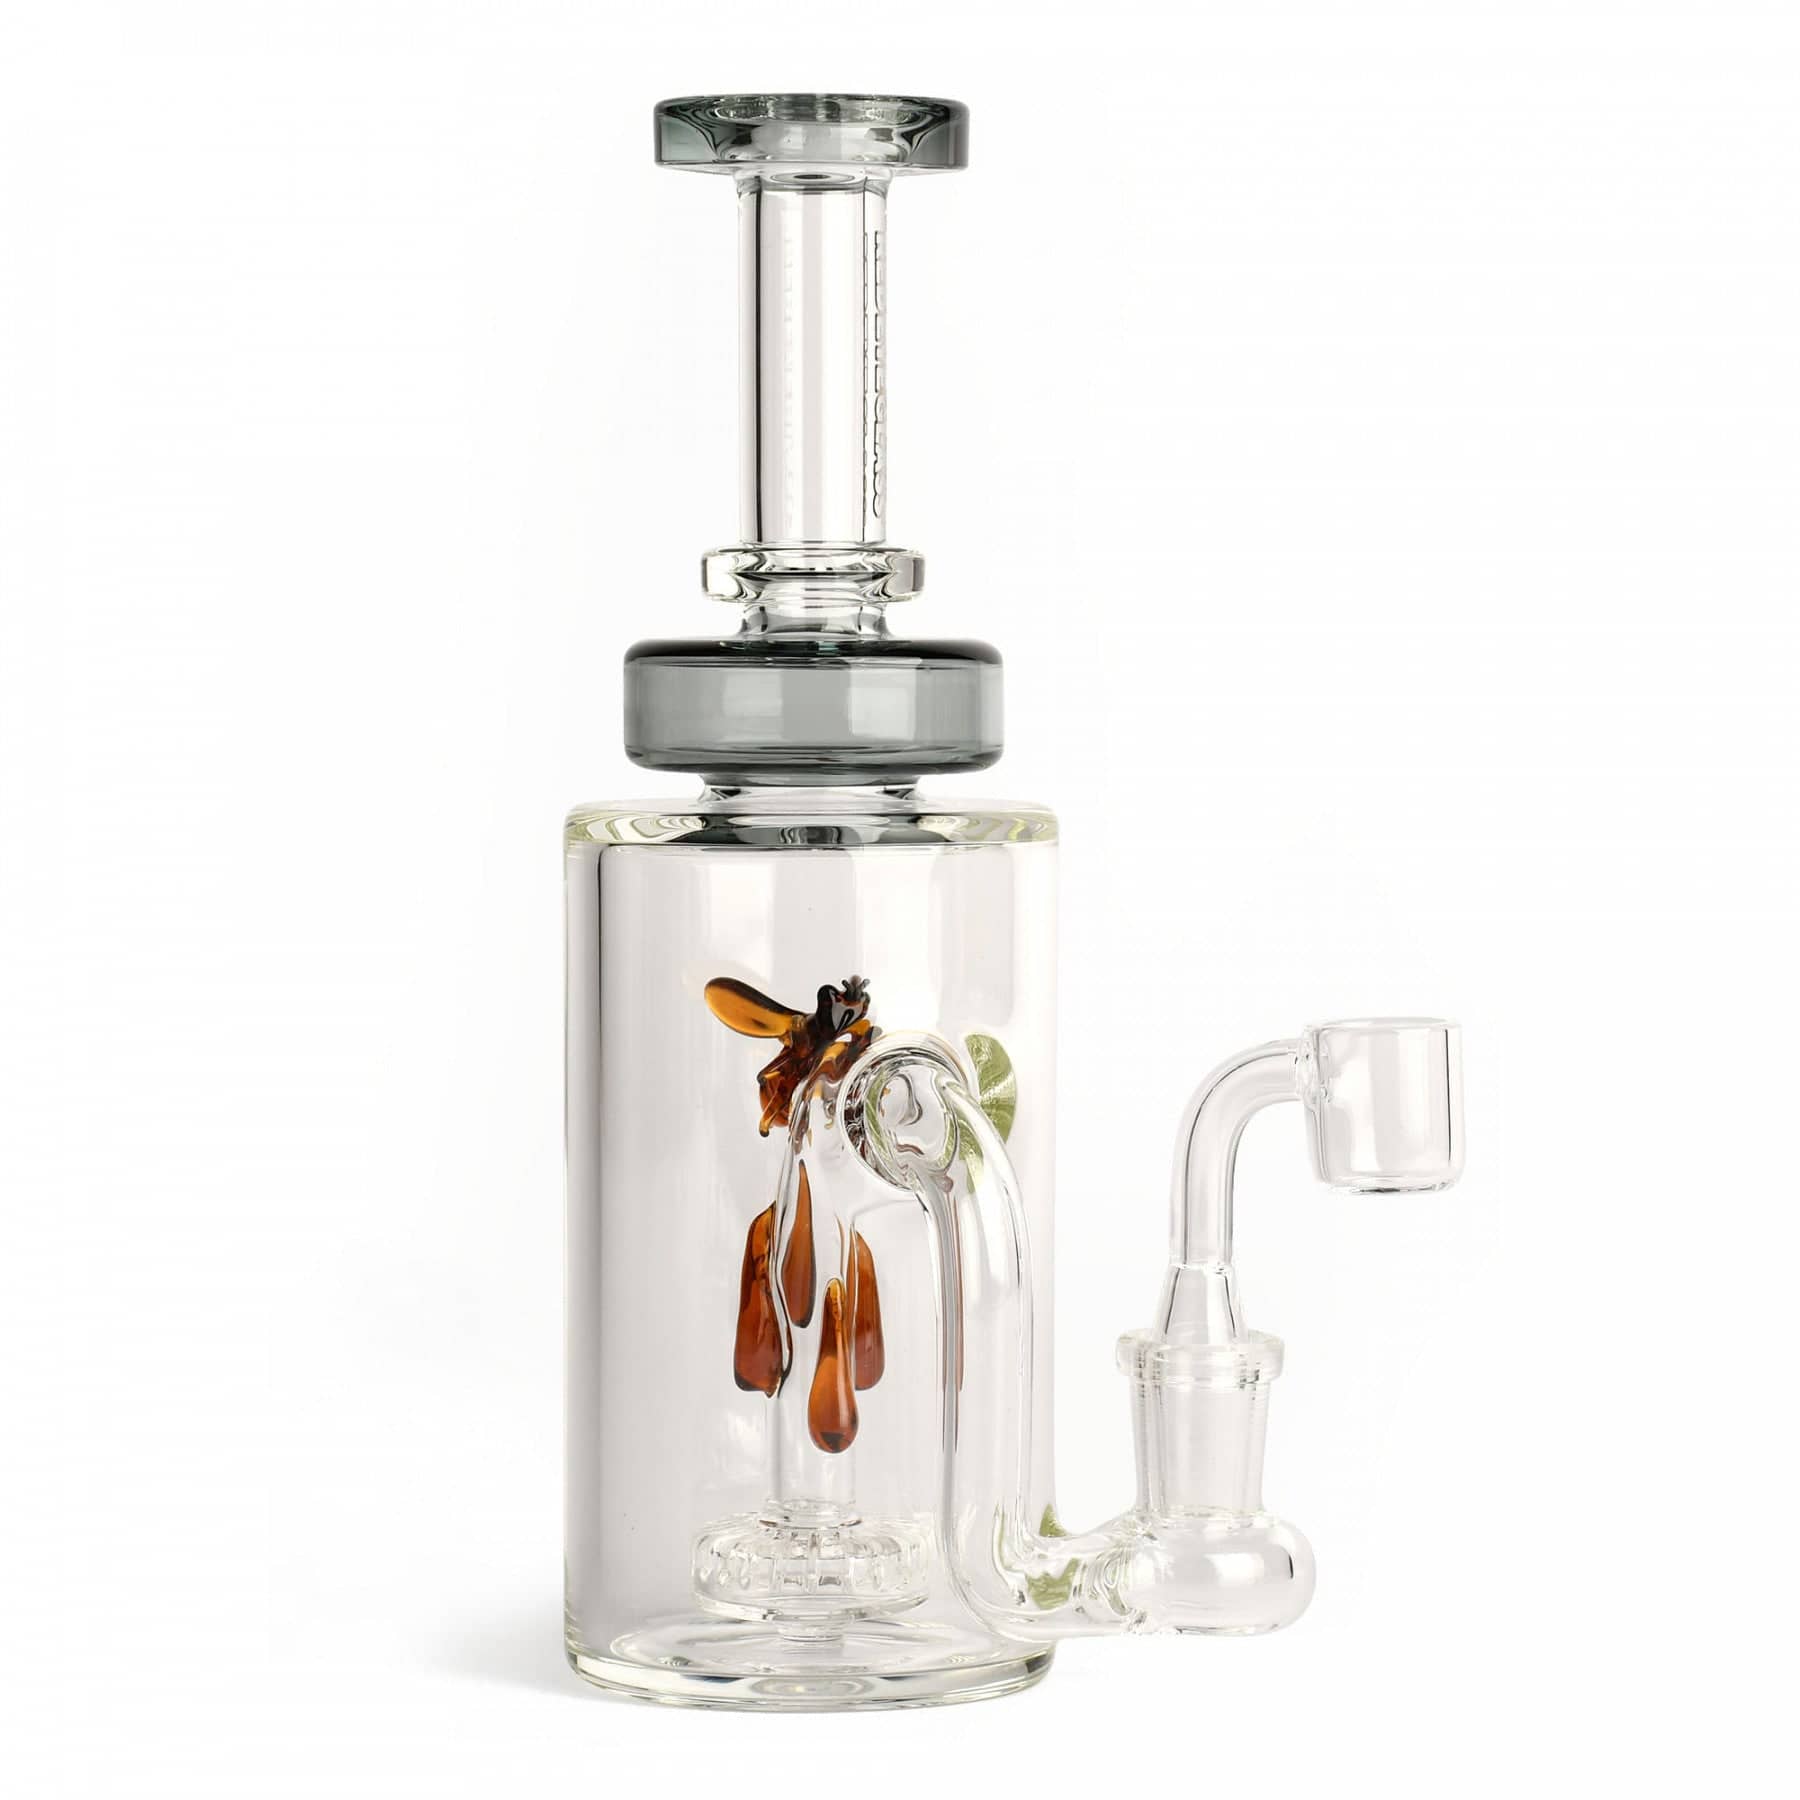 Chameleon Glass Spill Proof Monsoon Concentrate Spubbler Dab Rig